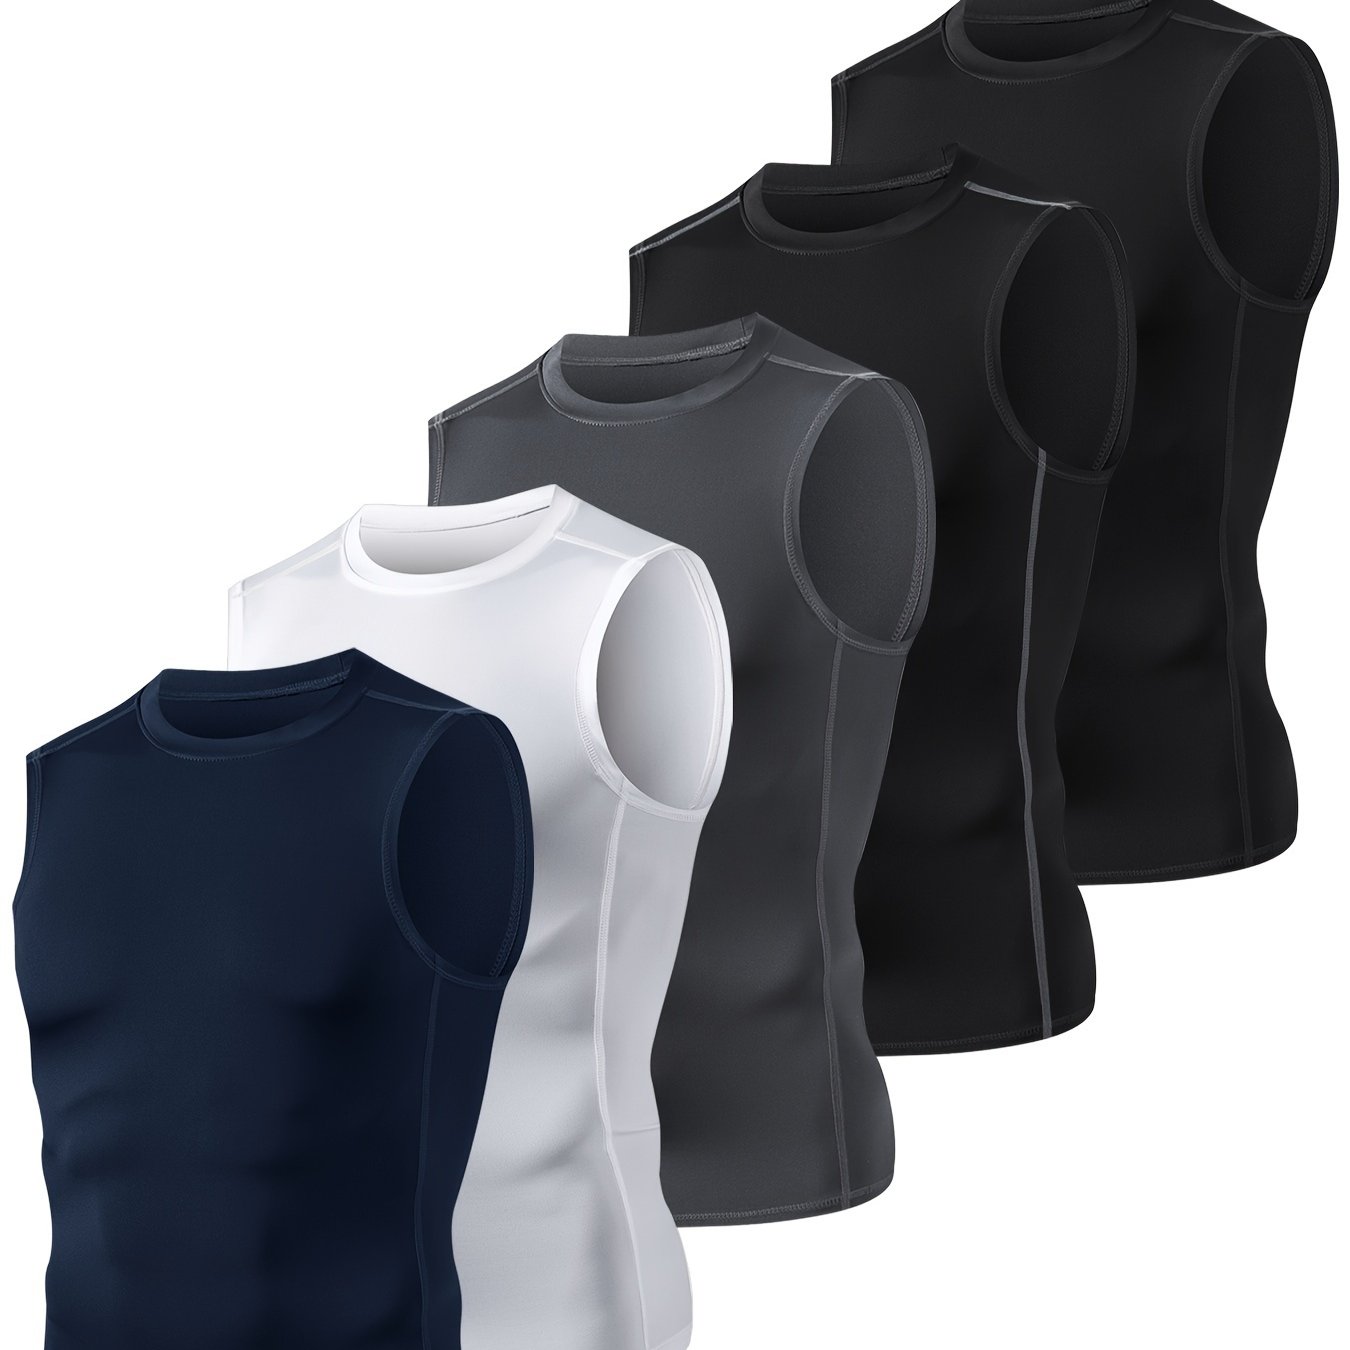  5 Pack Mens Athletic Compression Shirts Sleeveless